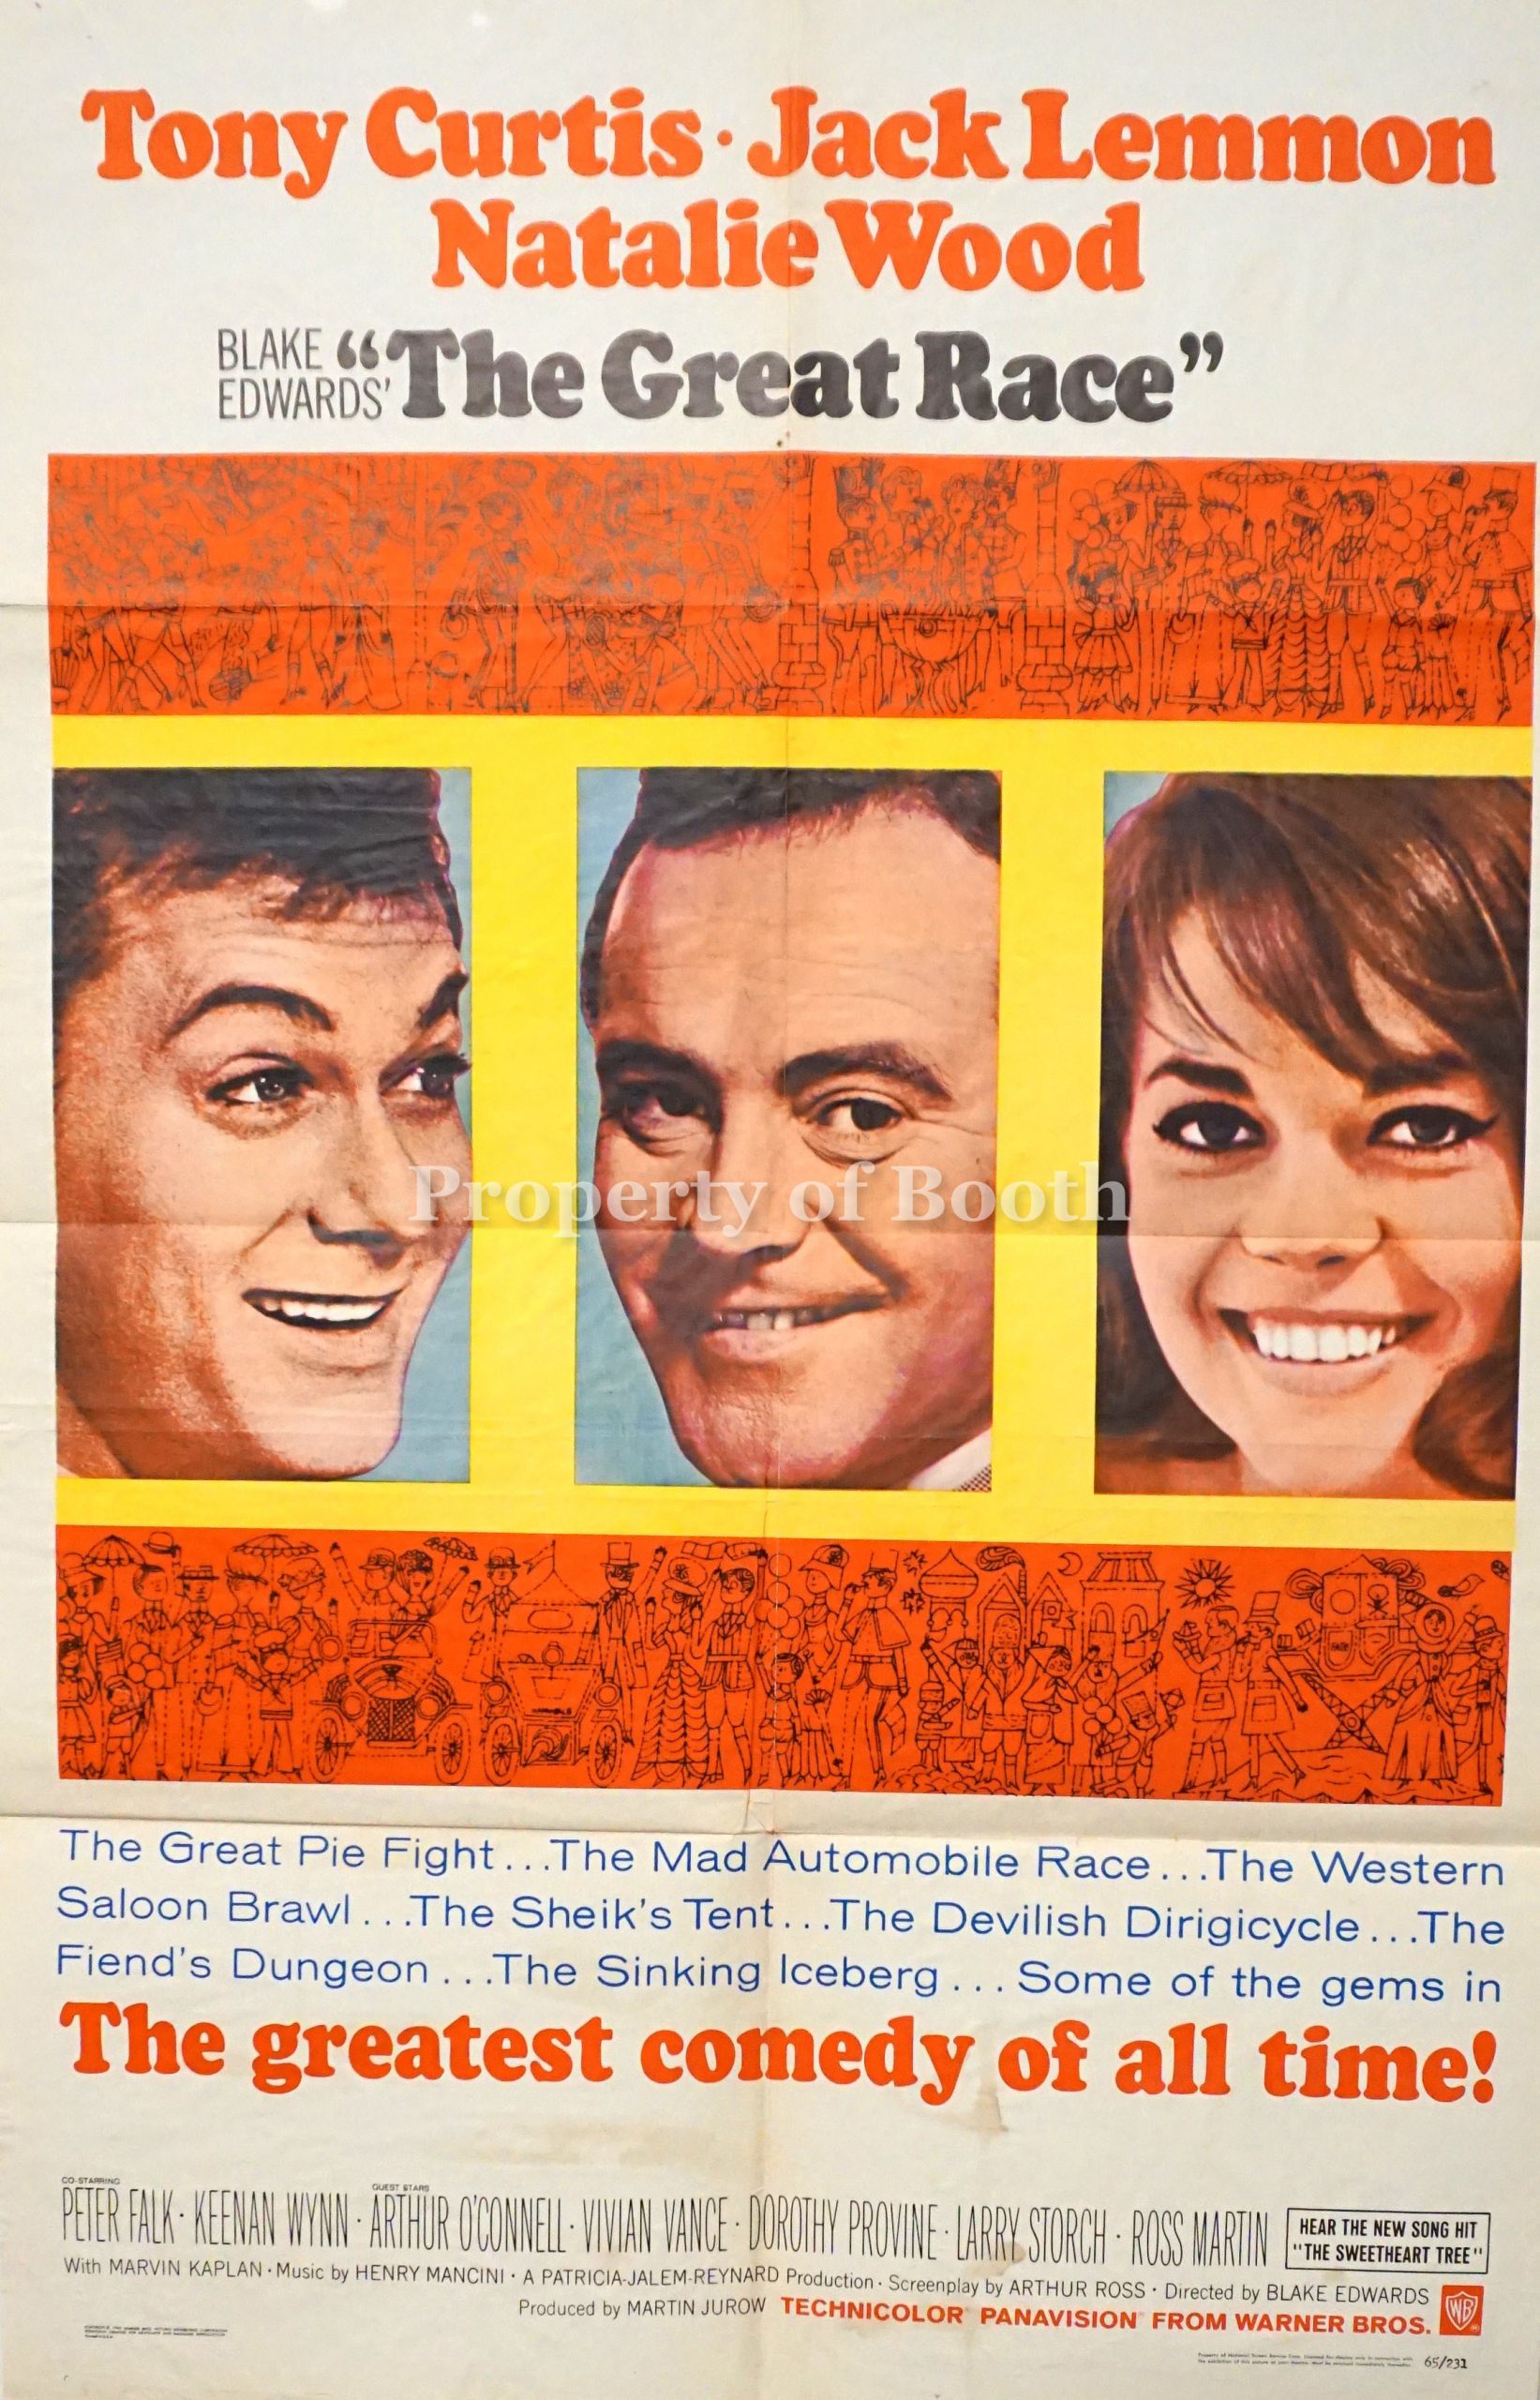 1965, The Great Race, 41 x 26.75"